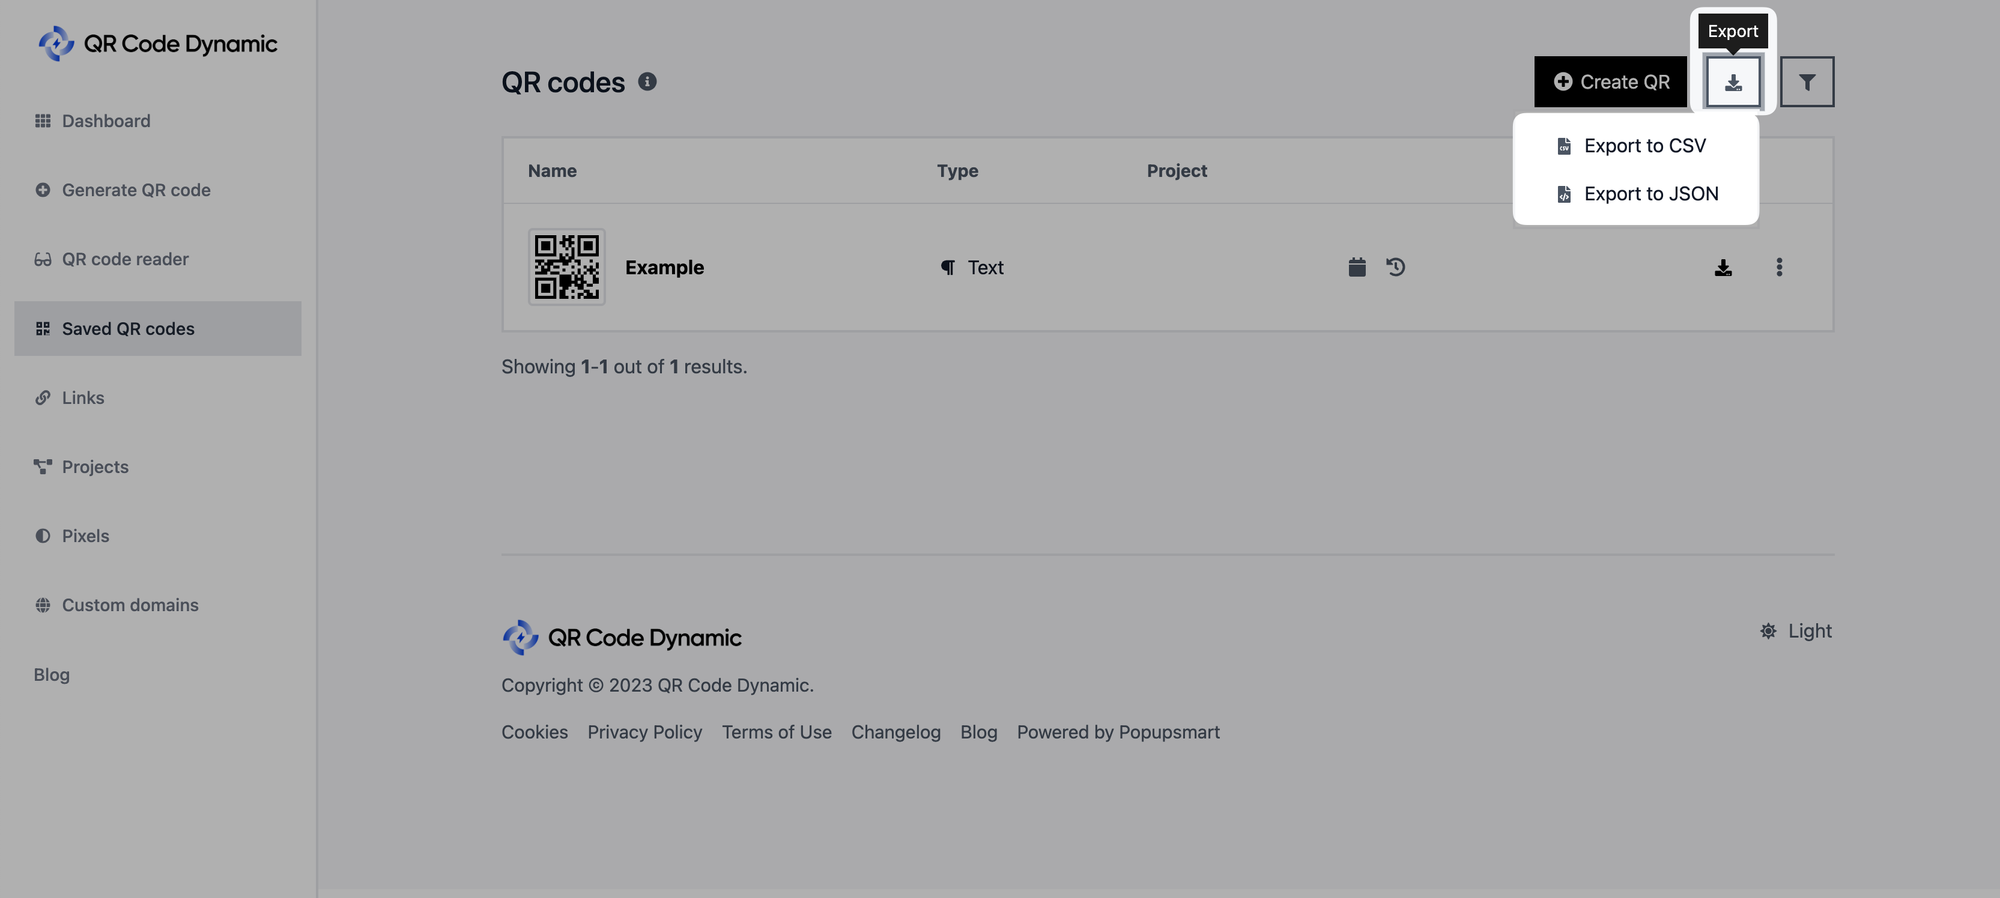 exporting qr codes